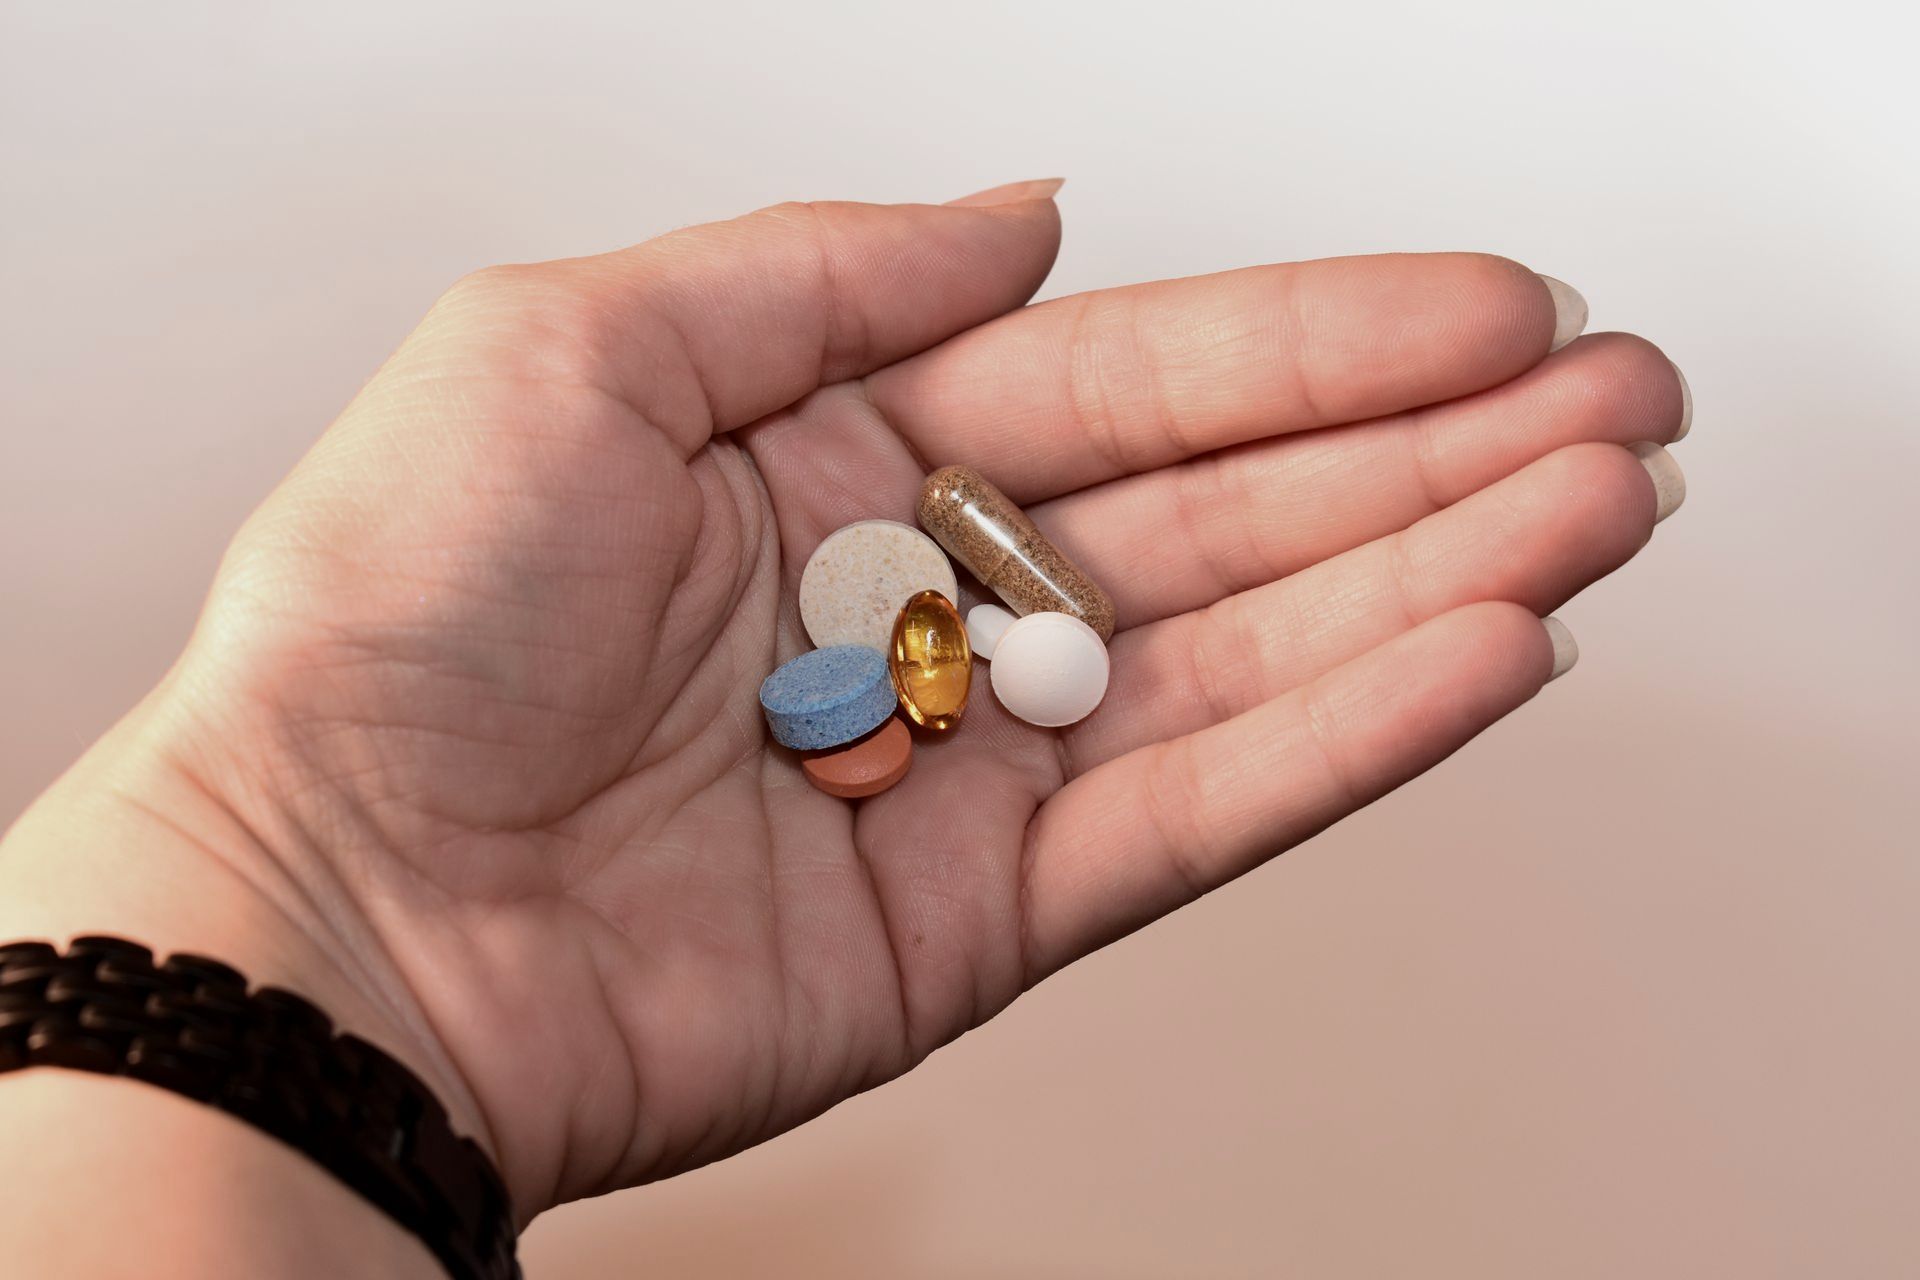 Hand Holding Medication Pill and Capsules